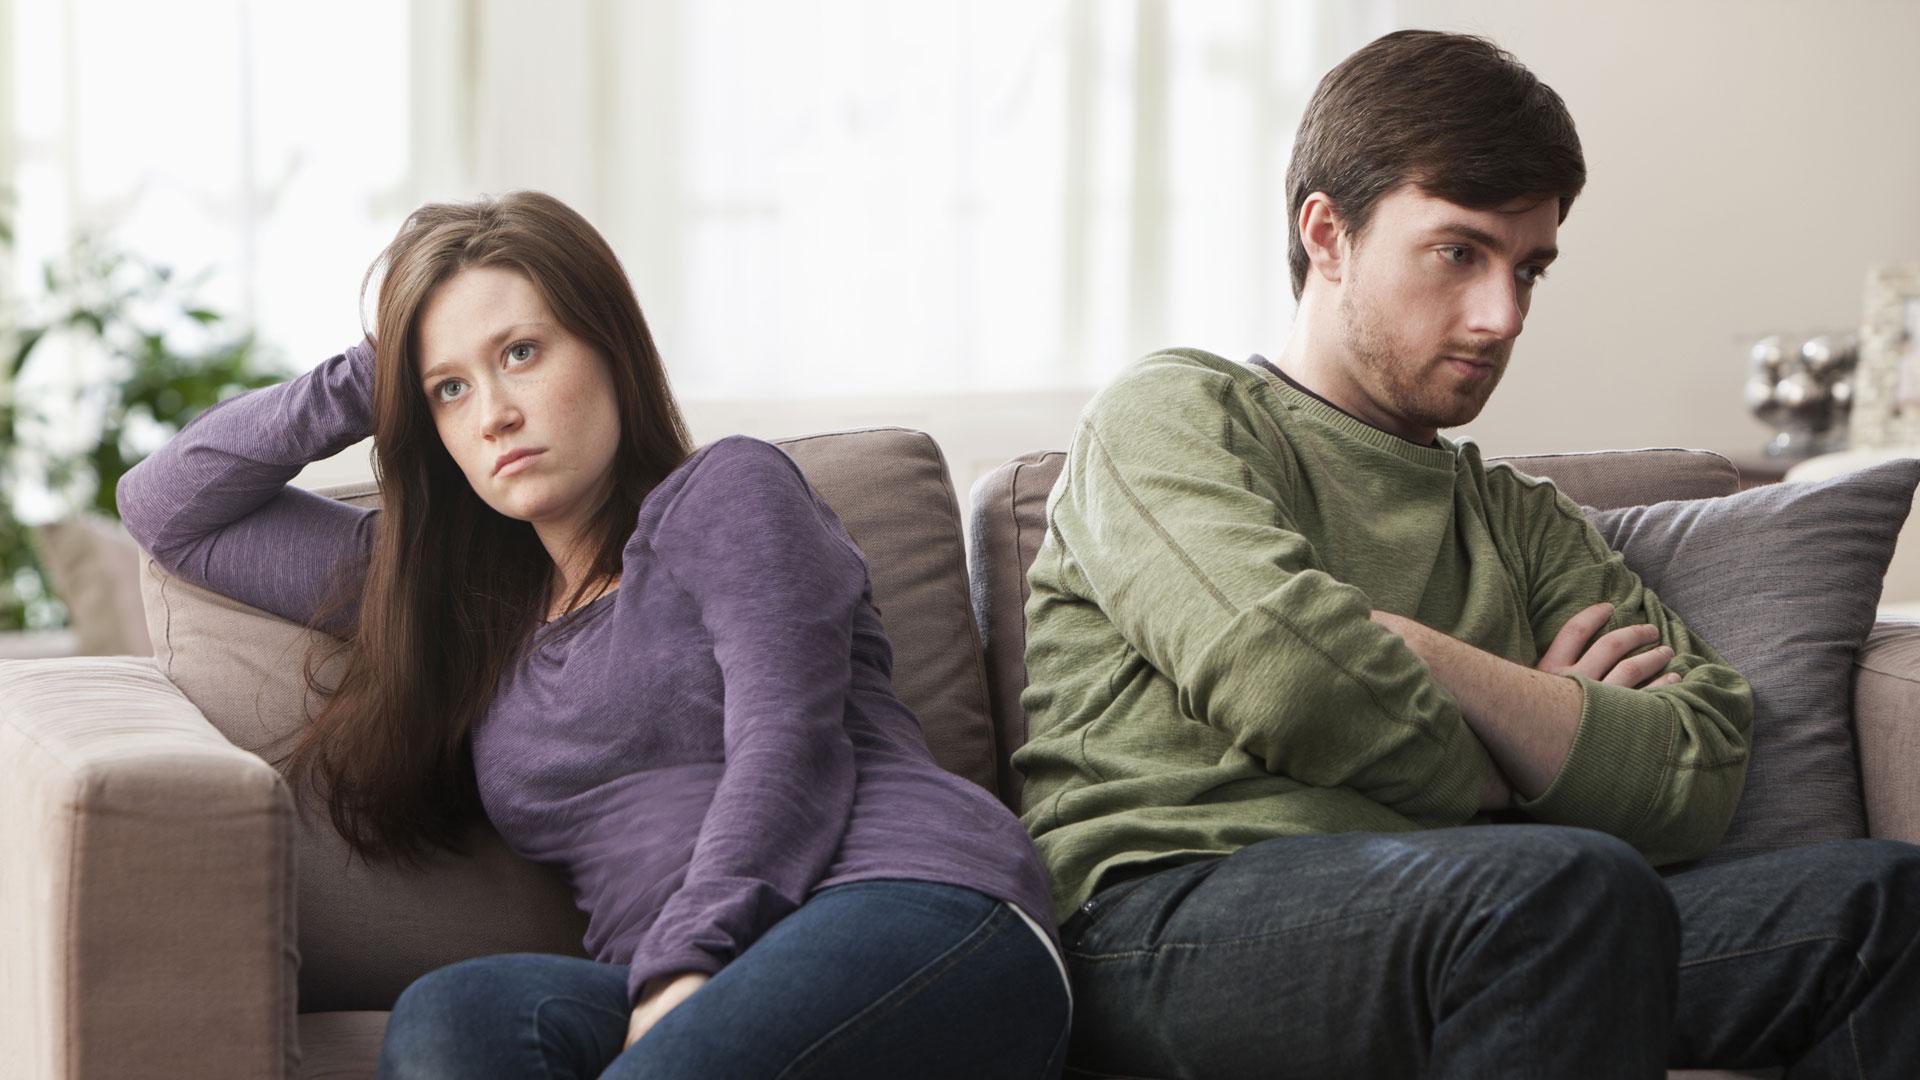 unhappy marriage, say spouse woman couple fighting unhappy 7-signs-you-re-headed-for-divorce